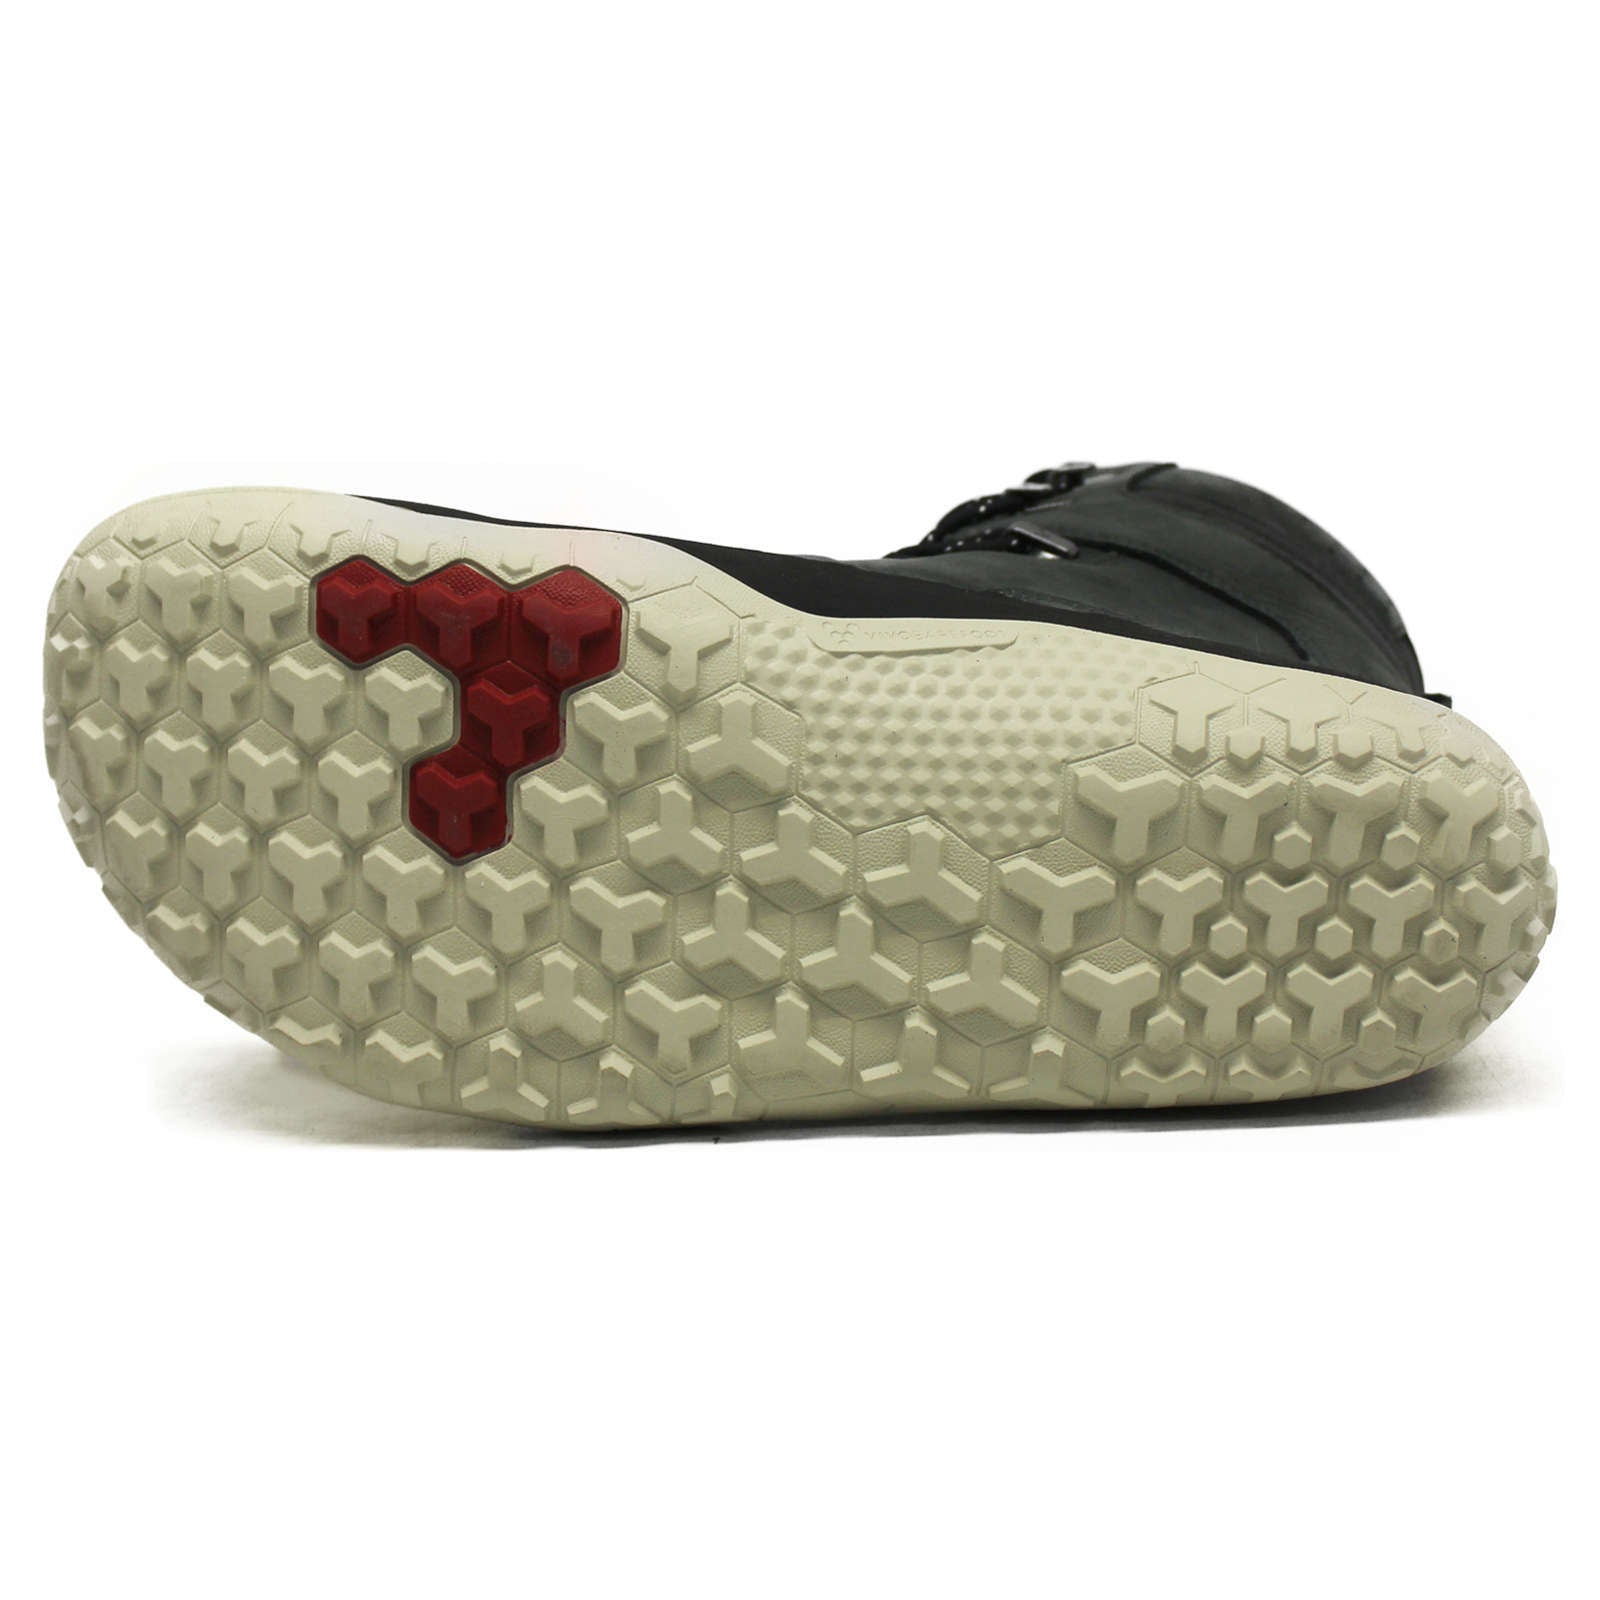 Vivobarefoot Tracker Hi II FG Leather Textile Synthetic Womens Boots#color_obsidian